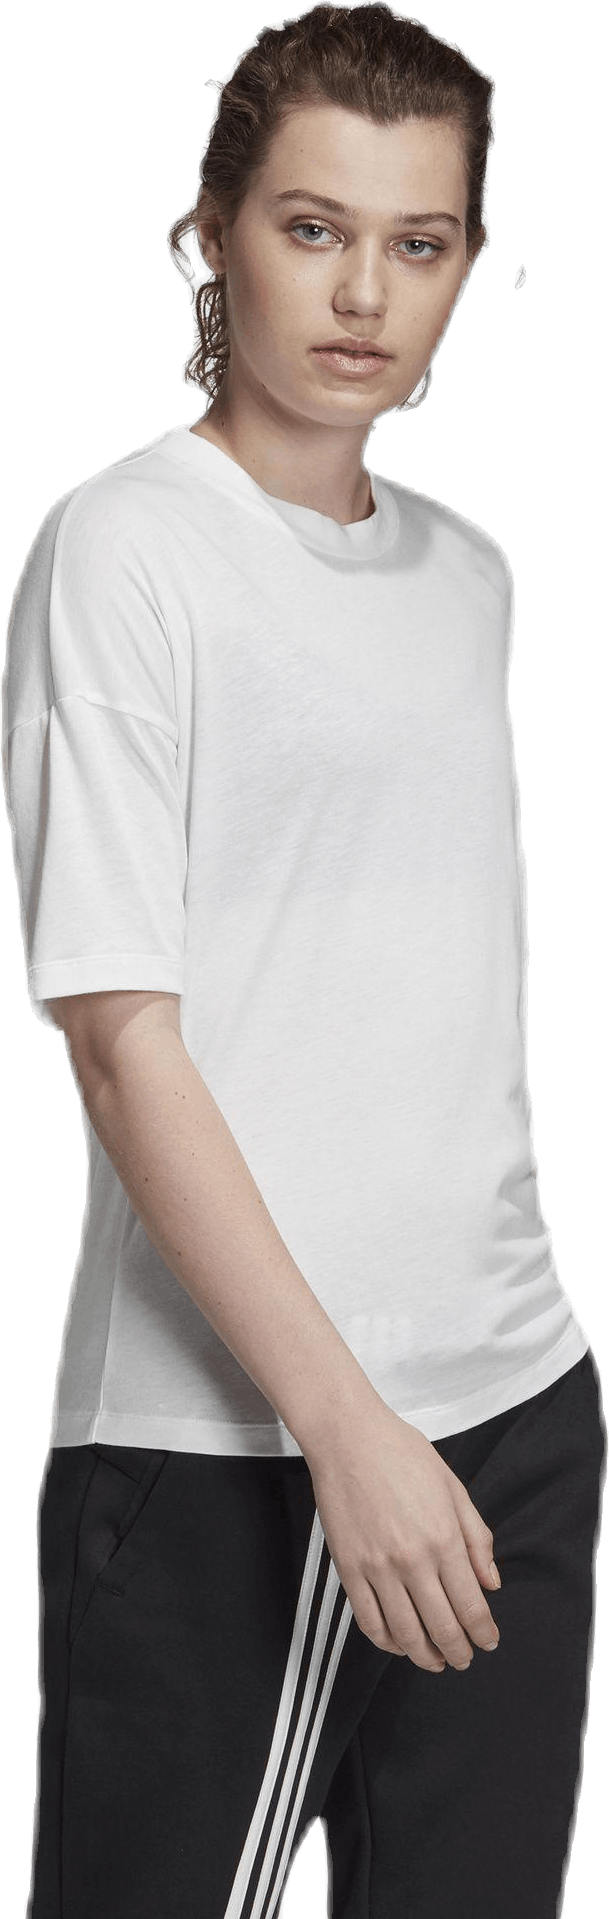 Must Haves 3-Stripes T-Shirt White